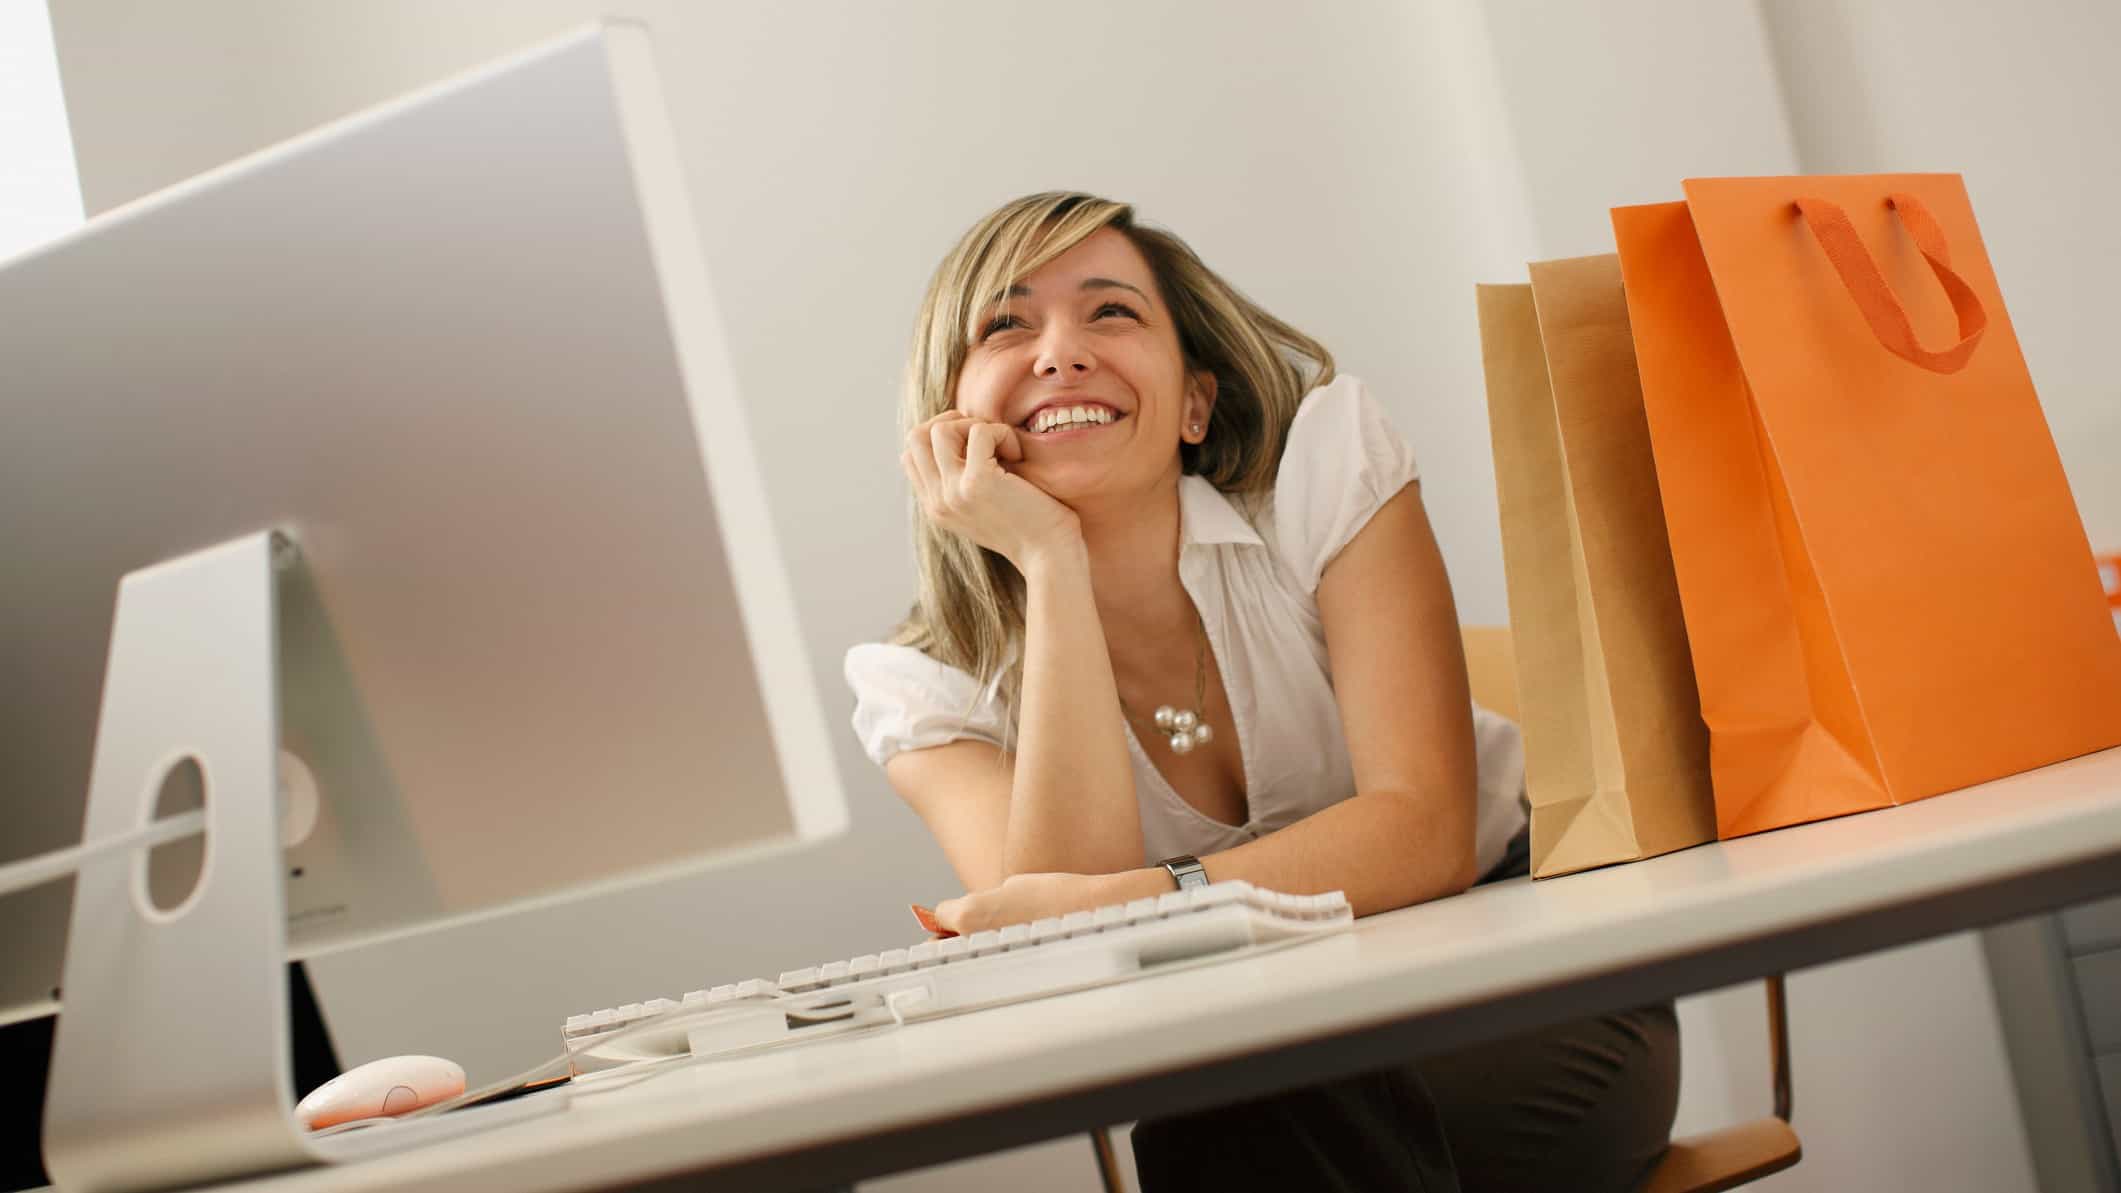 A smiling woman at her computer after a successful online shopping experience.